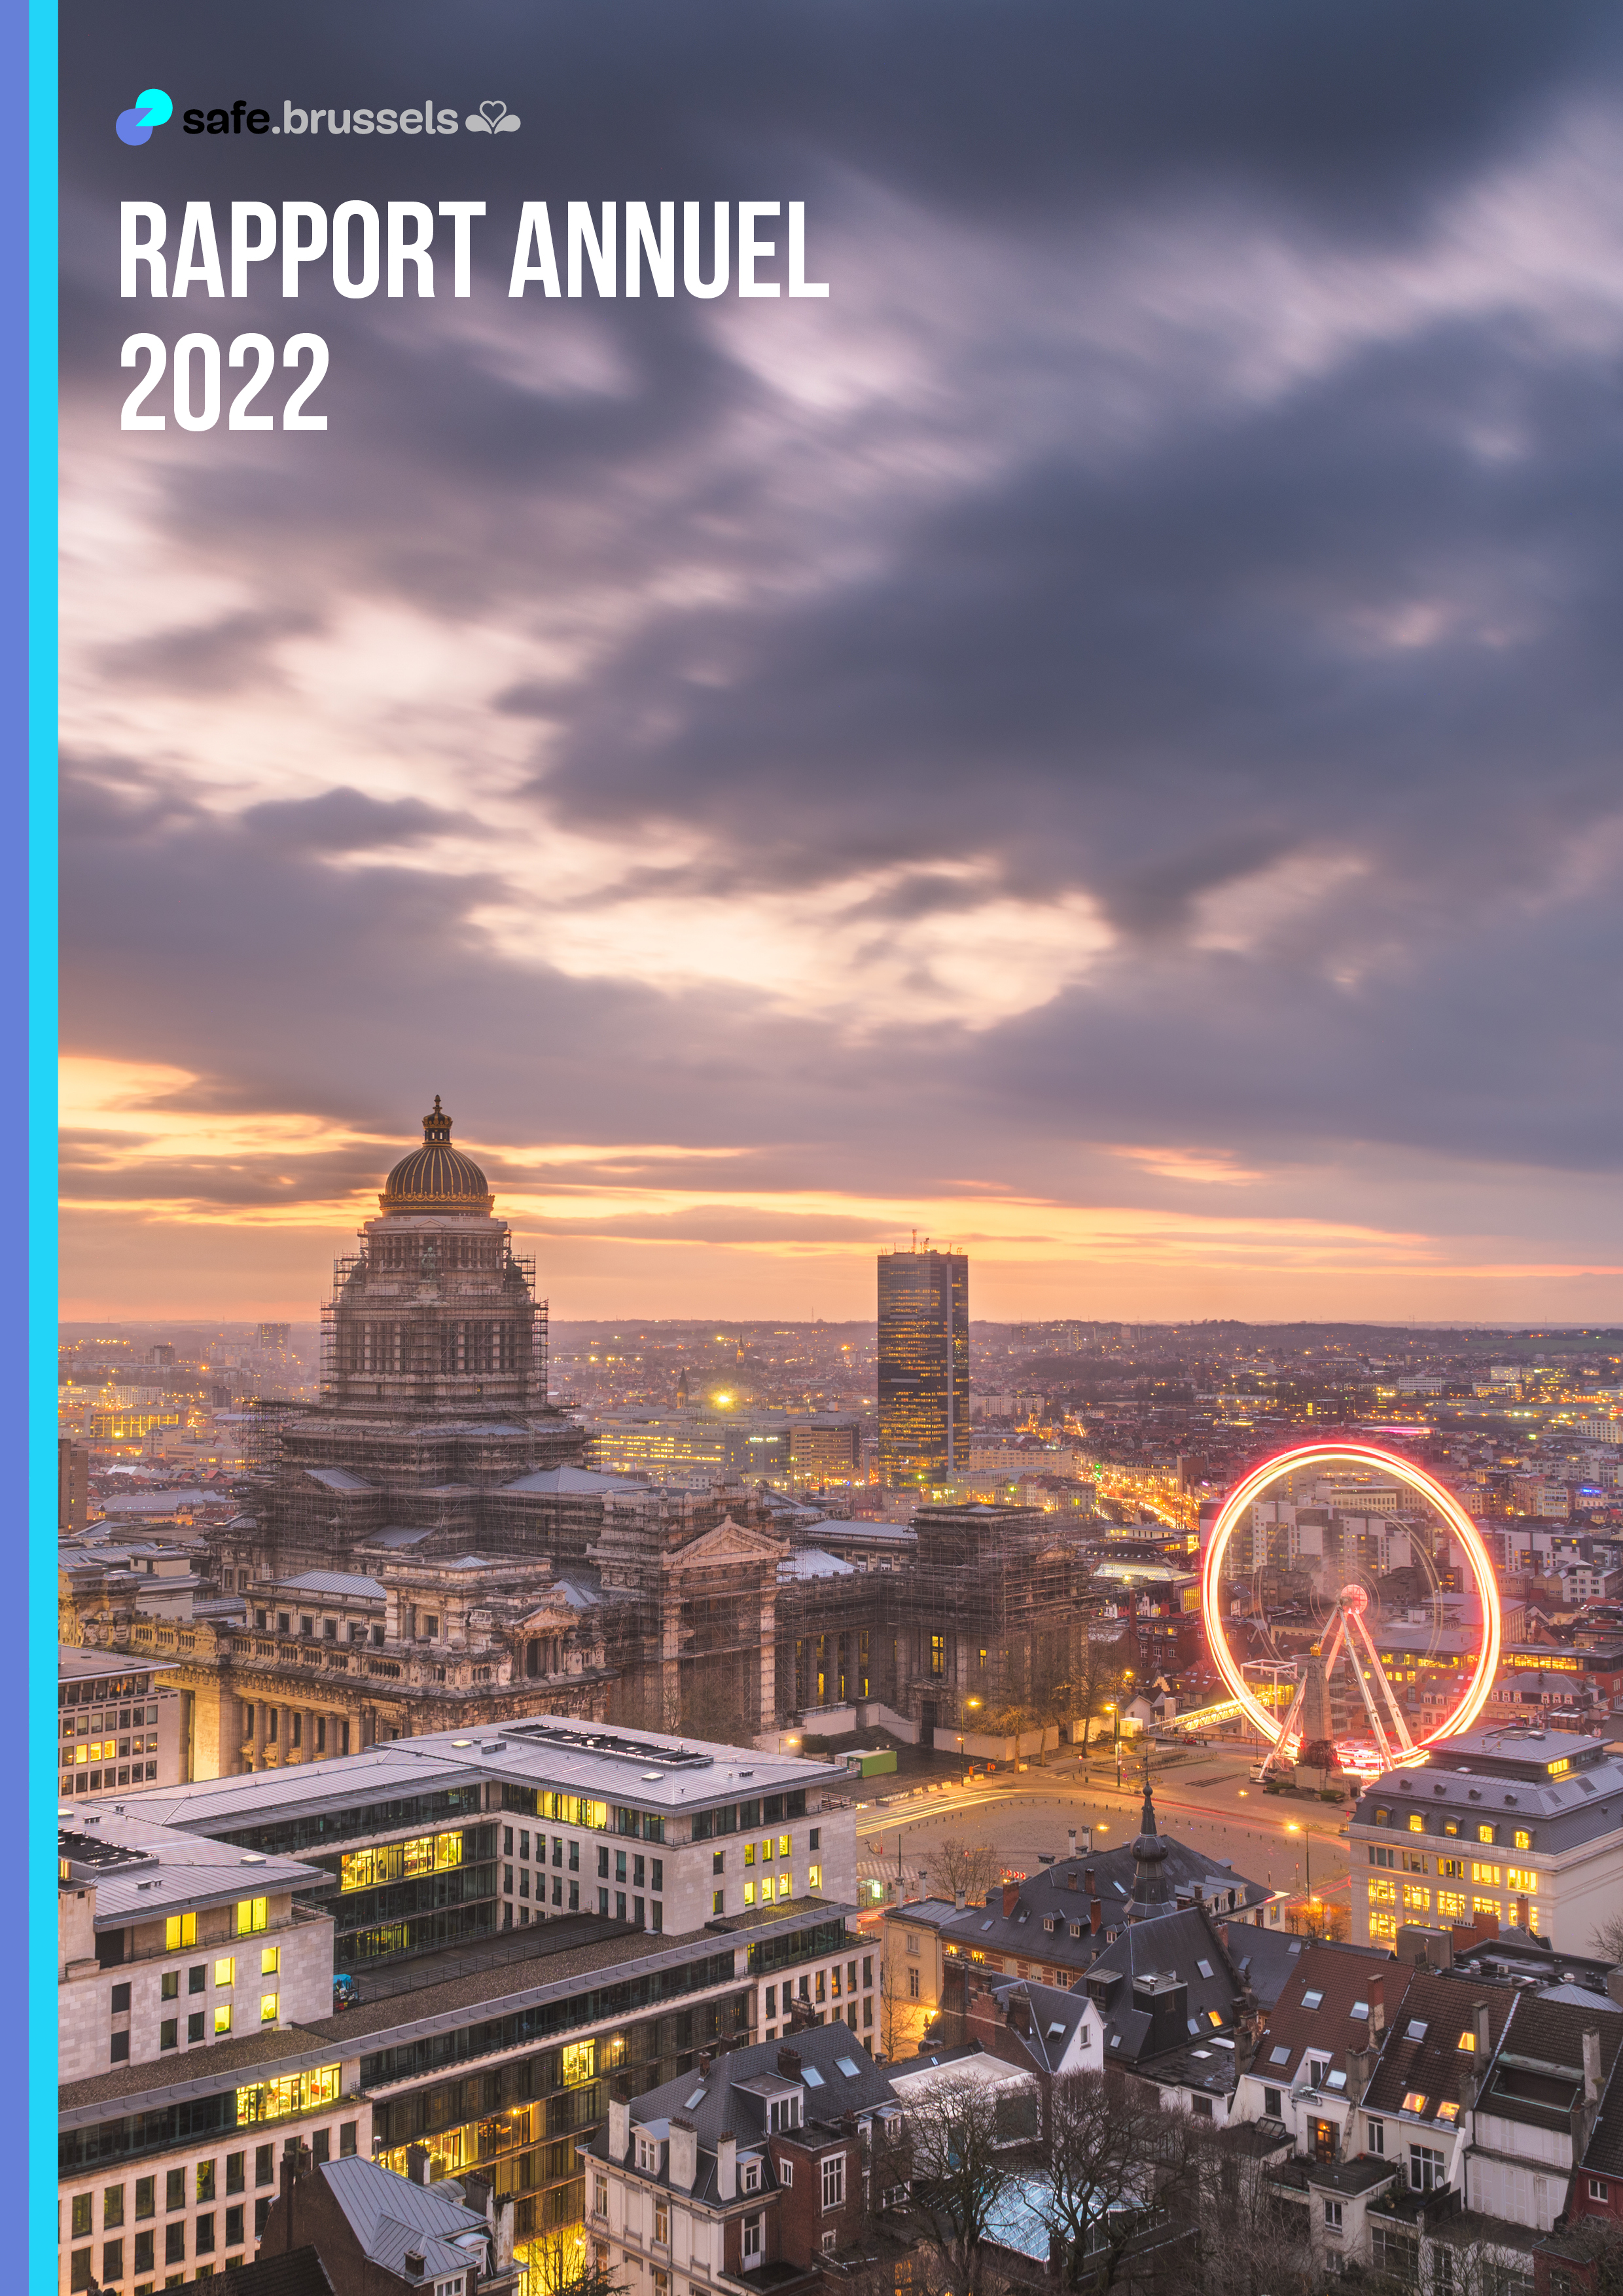 Rapport annuel 2022